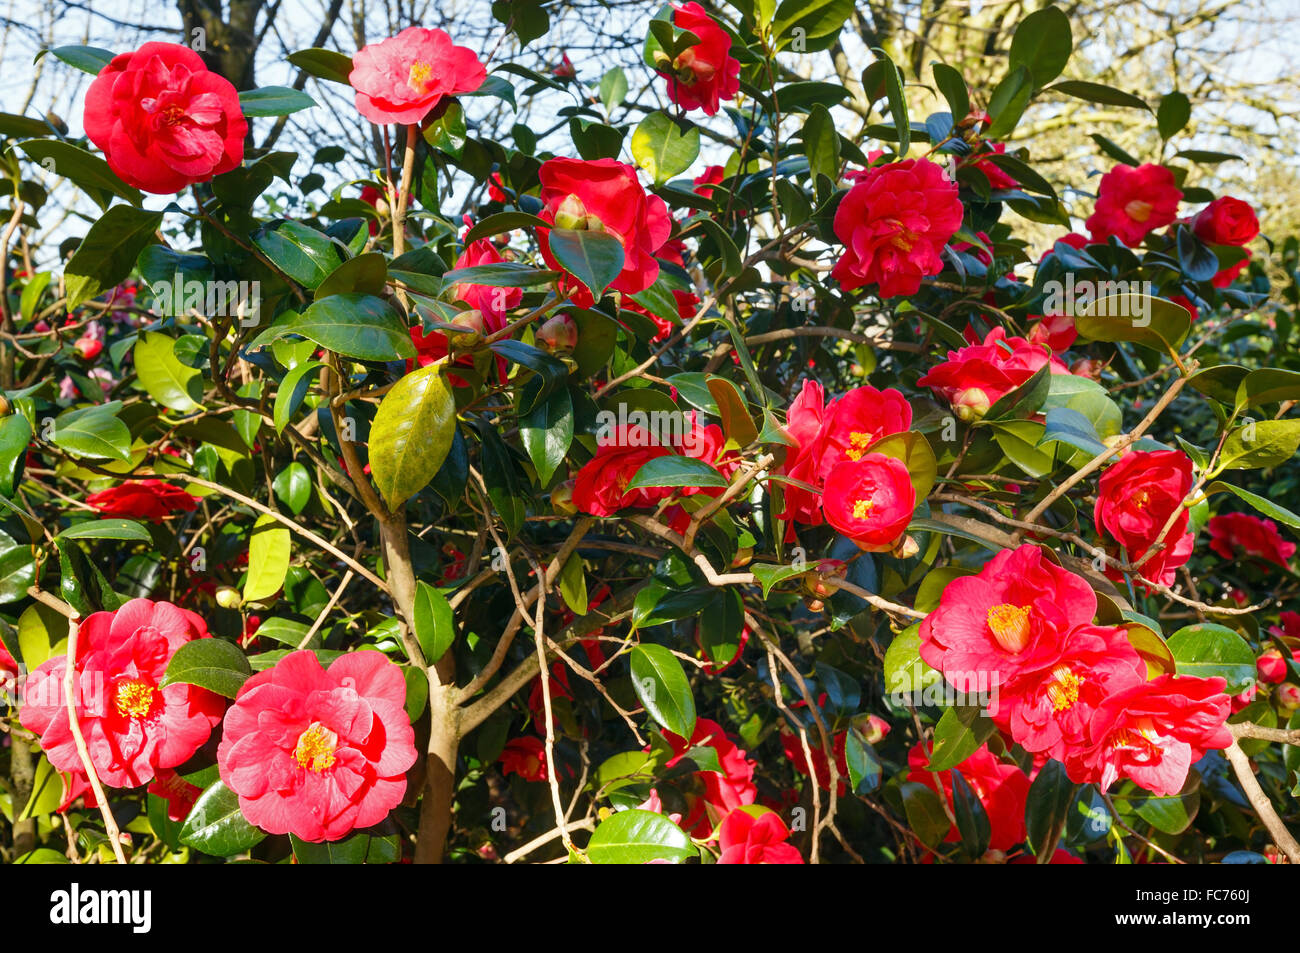 Blossoming Camellia bush with red flowers. Stock Photo